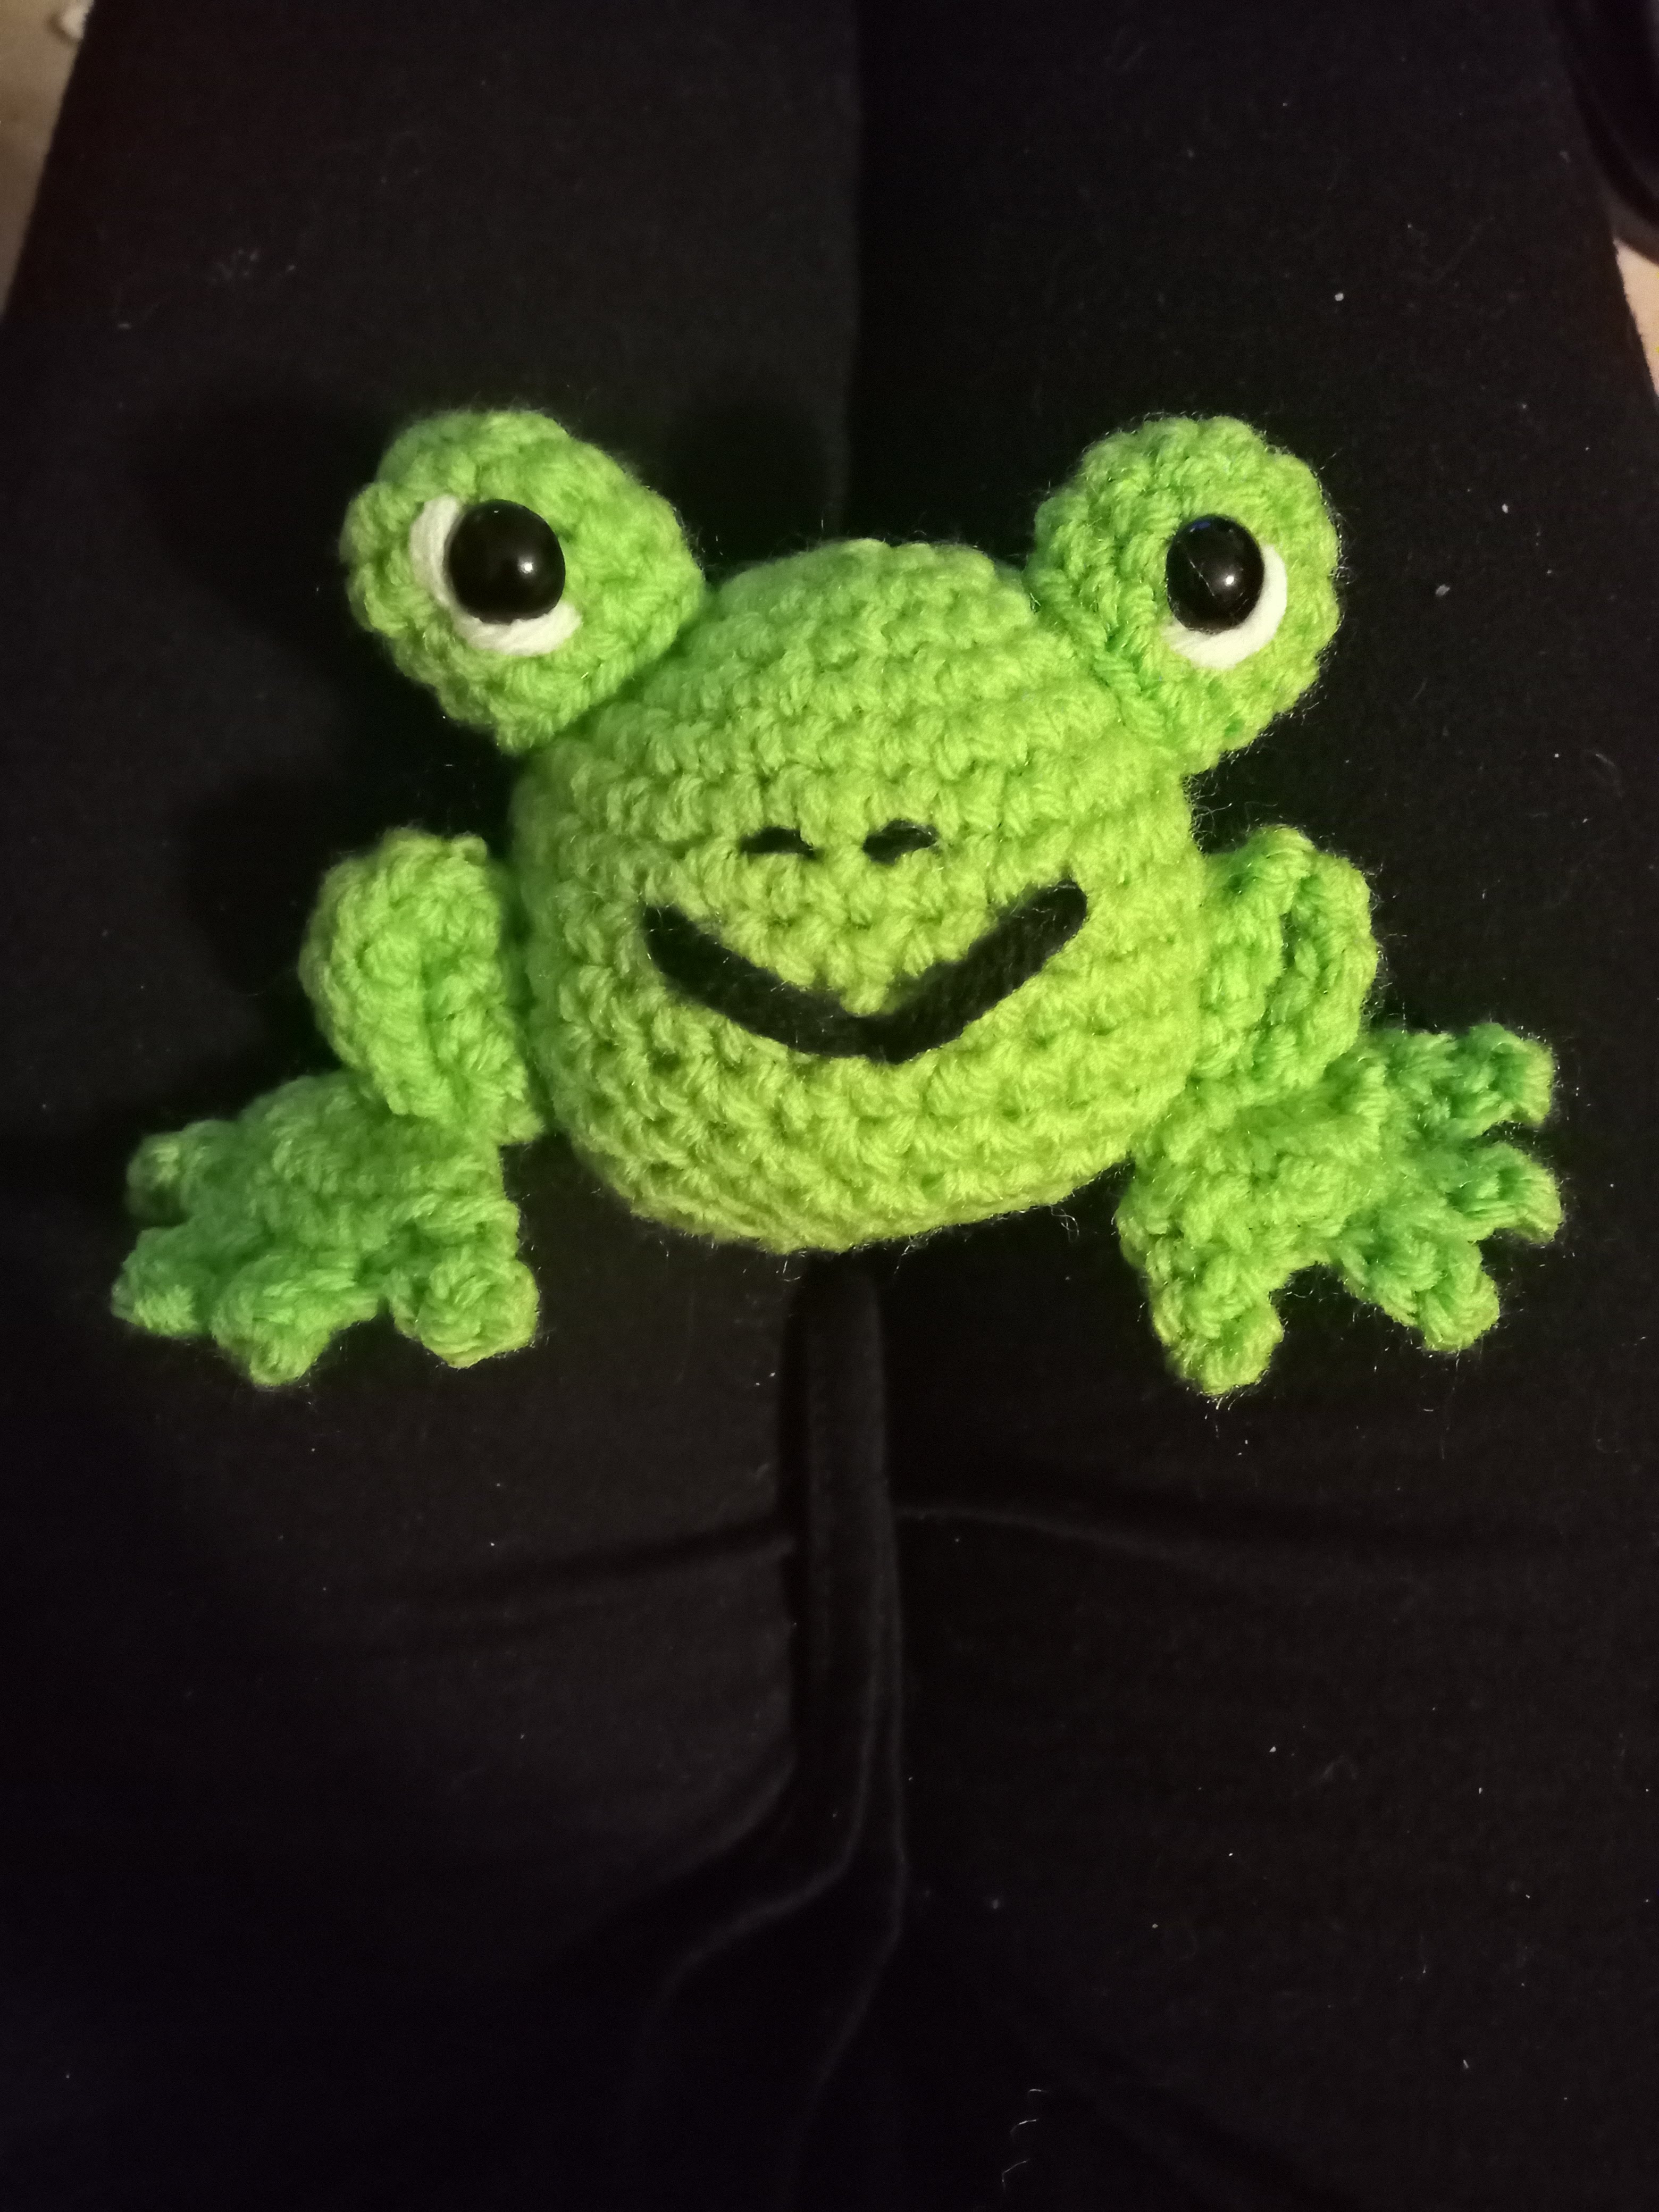 a cute crocheted smiling green frog